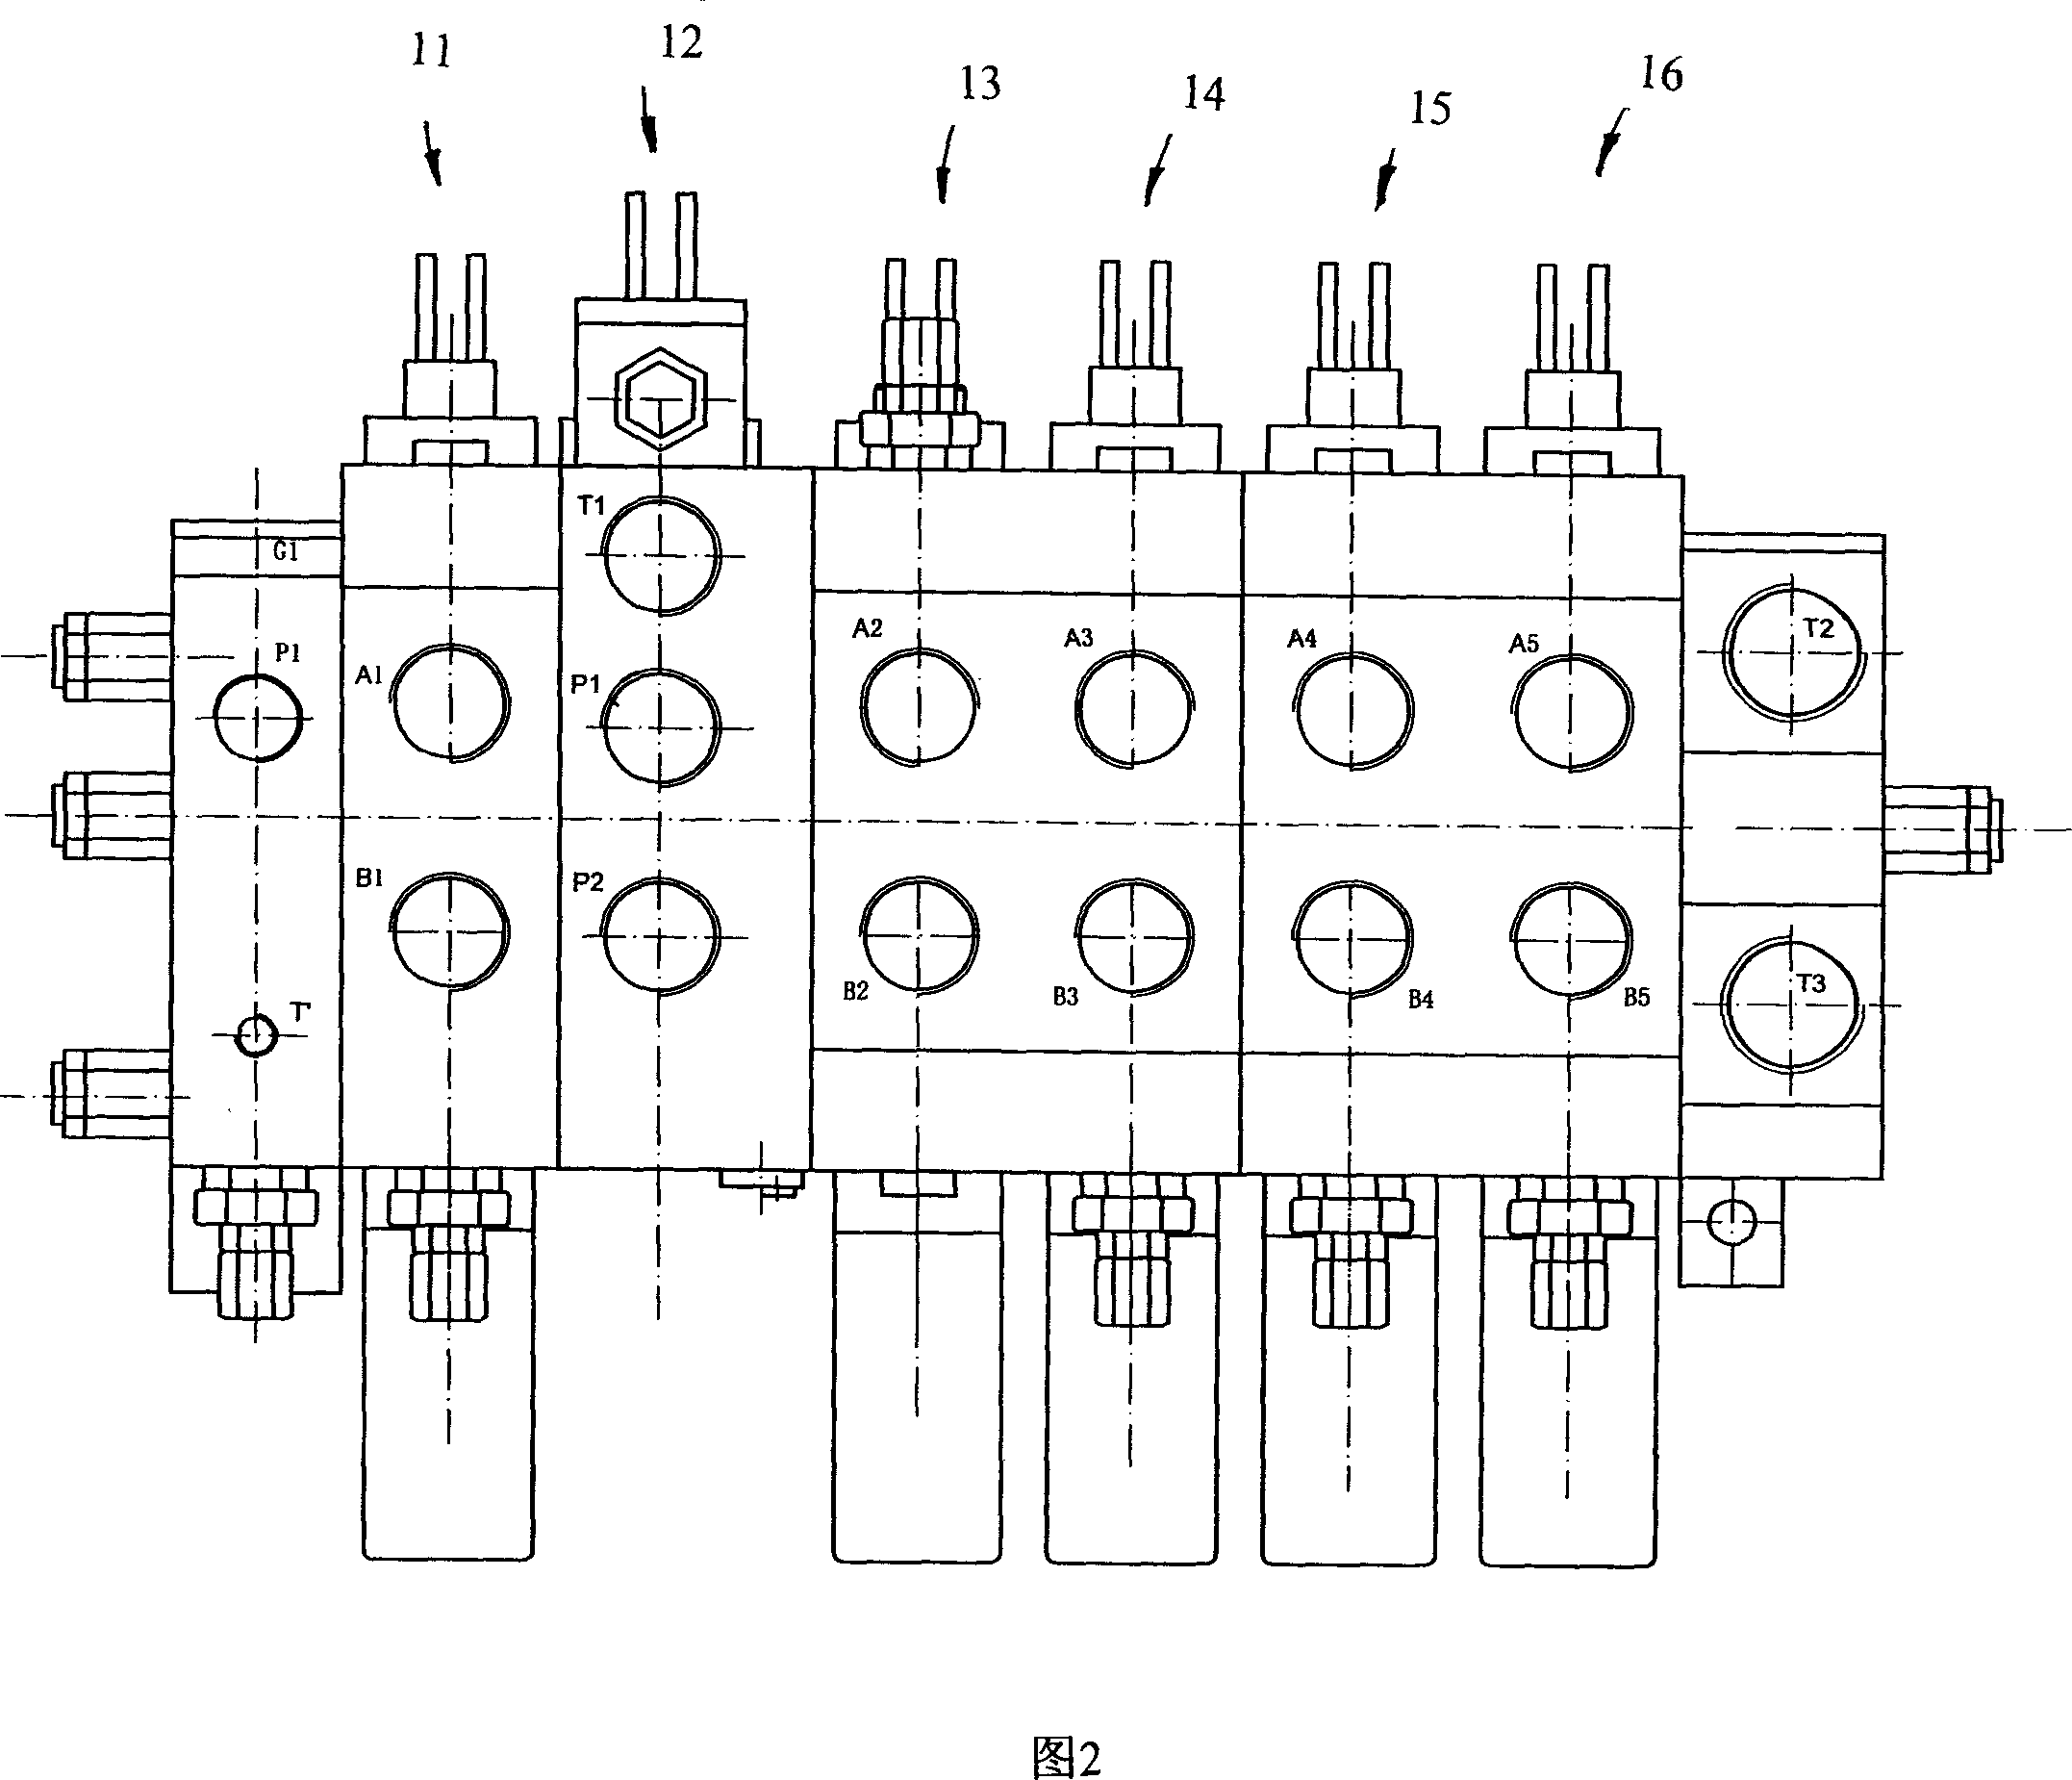 Five-parallelled composite proportional operating valve set